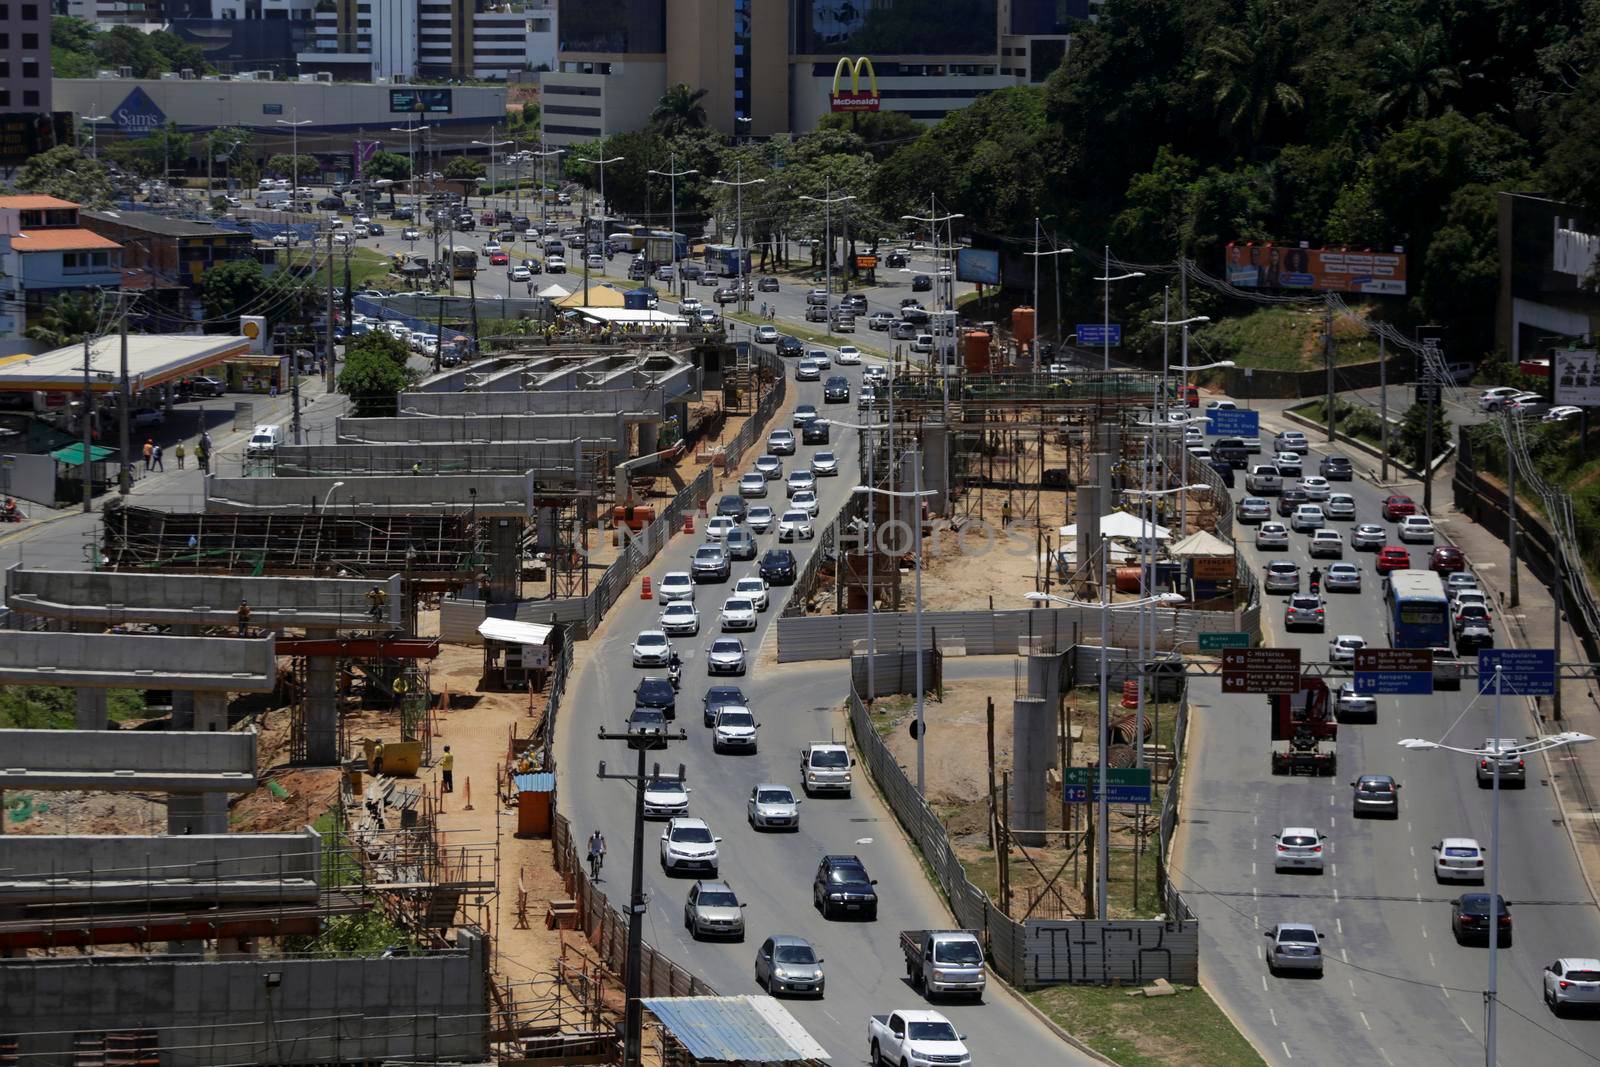 salvador, bahia / brazil - october 24, 2019: aerial view of Avenida Antonio Carlos Magalhaes in Salvador. The site is undergoing construction of viaducts to implement the BRT system.